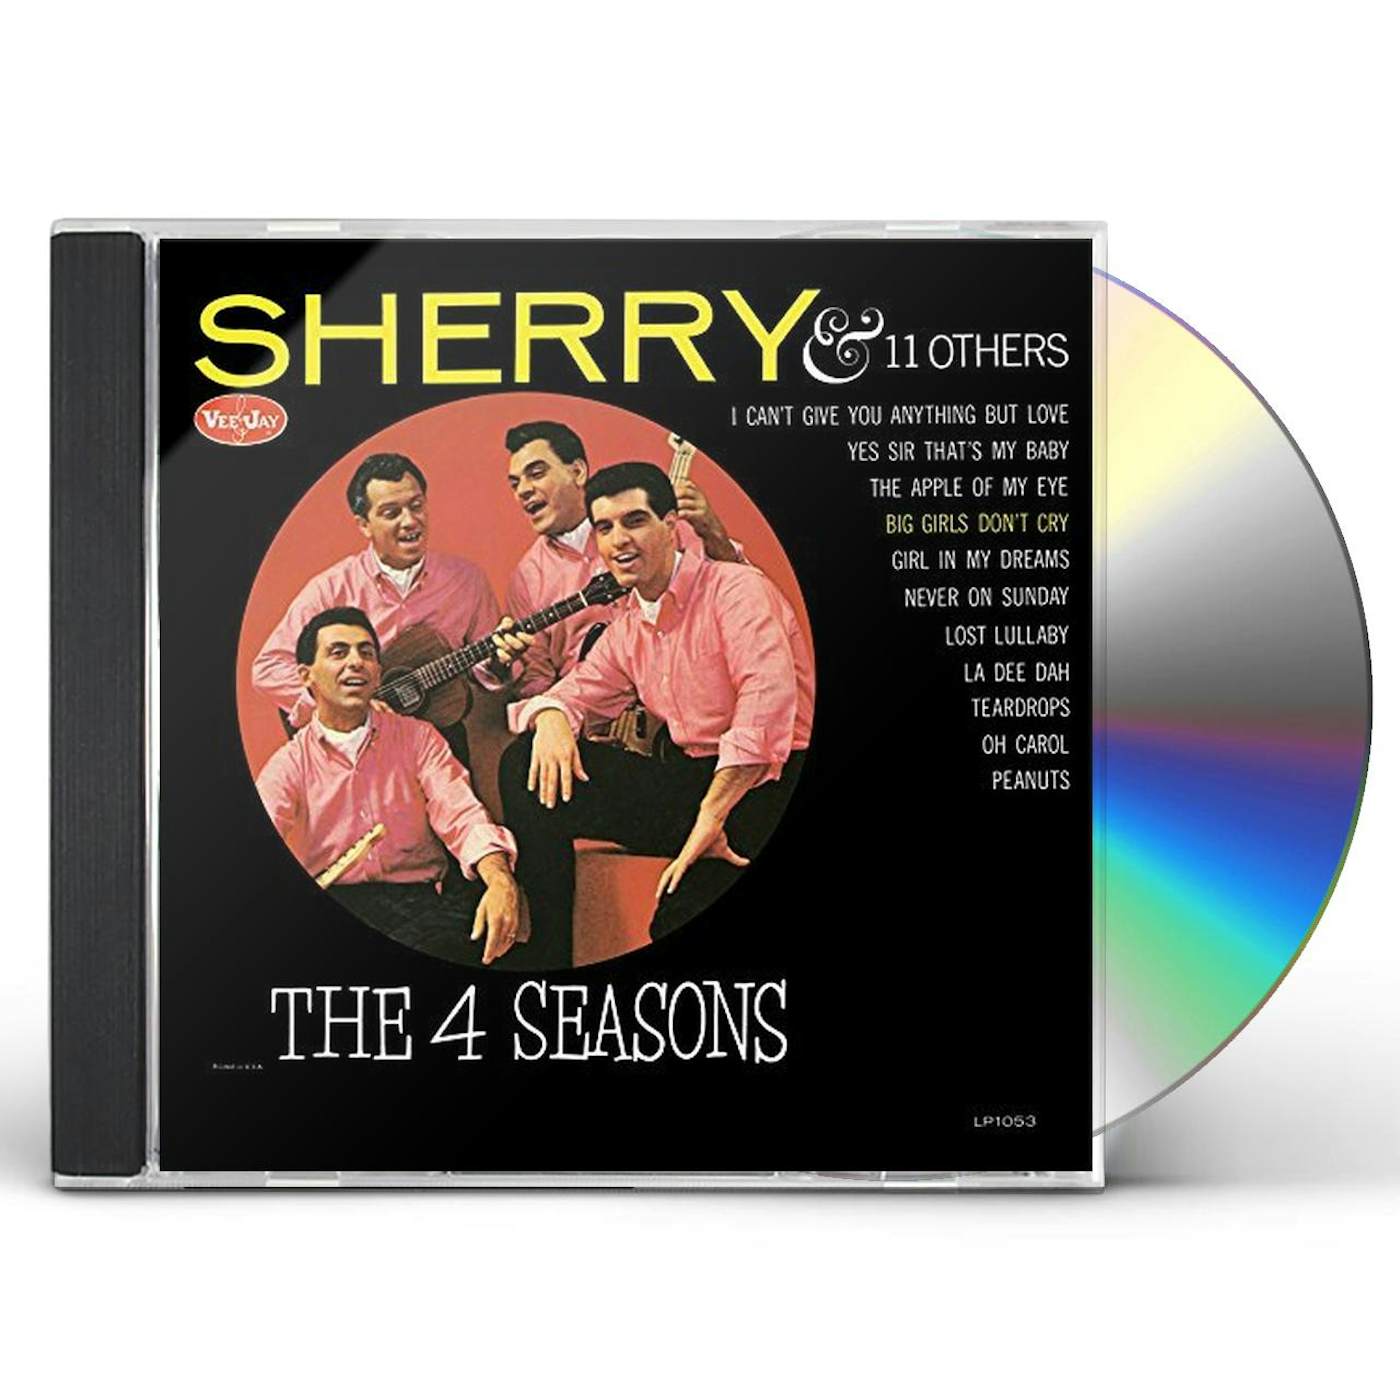 Four Seasons SHERRY & 11 OTHERS CD